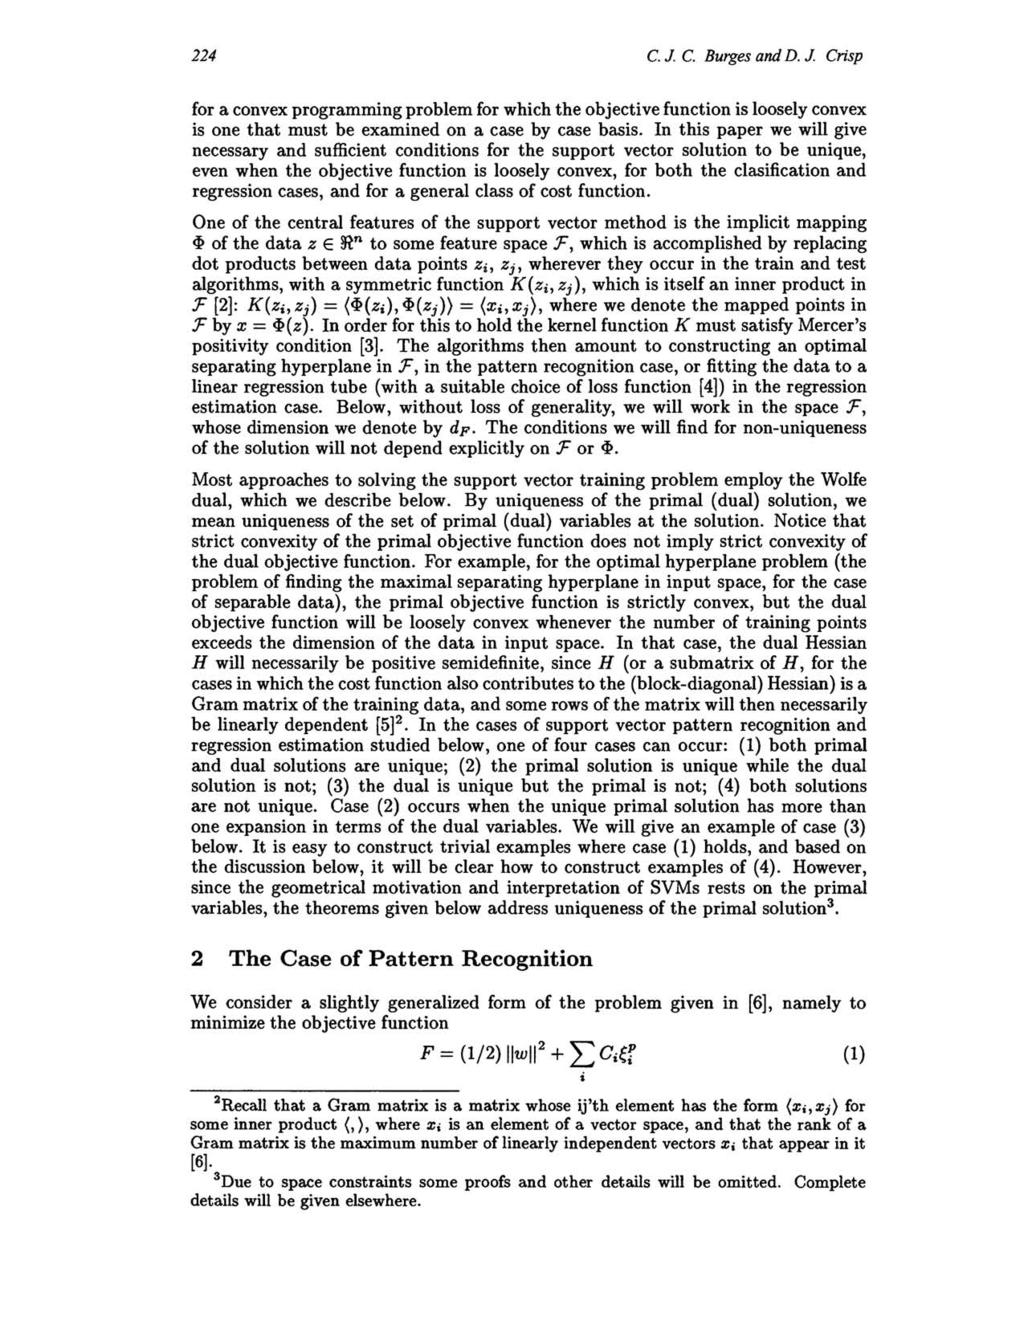 224 C. J. C. Burges and D. J. Crisp for a convex programming problem for which the objective function is loosely convex is one that must be examined on a case by case basis.